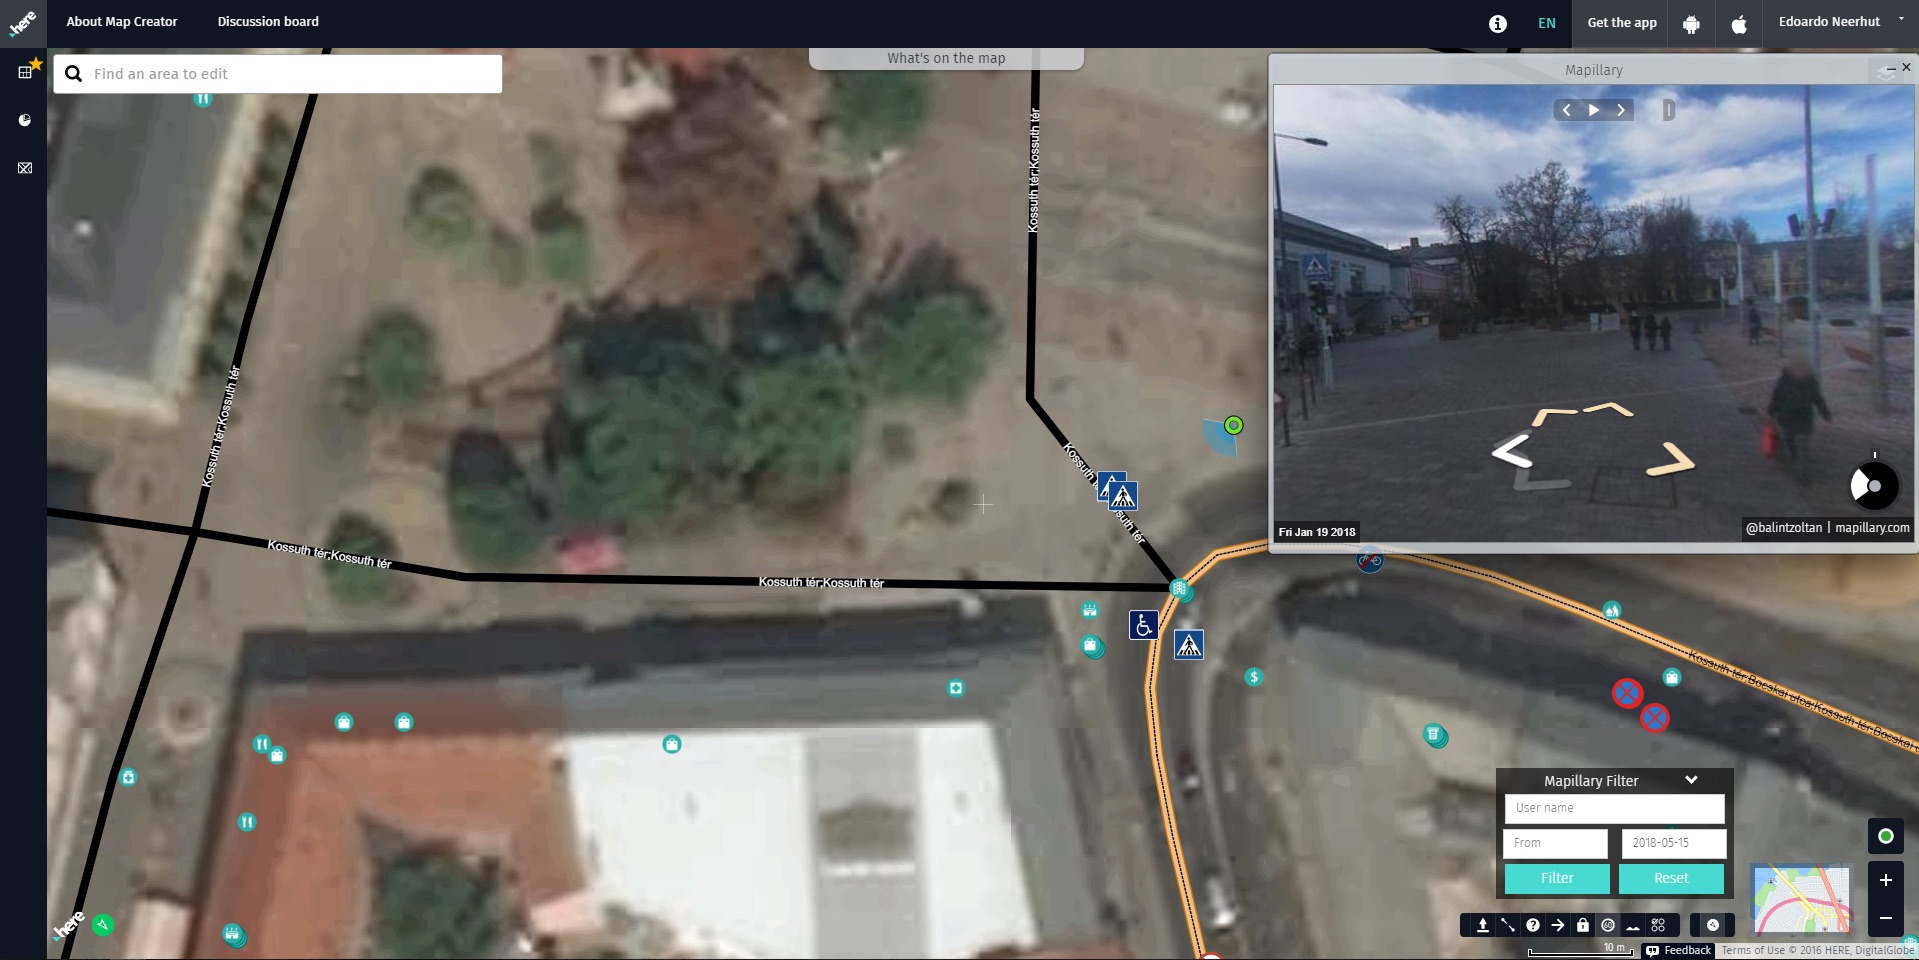 Adding cycling information in Map Creator with Mapillary images